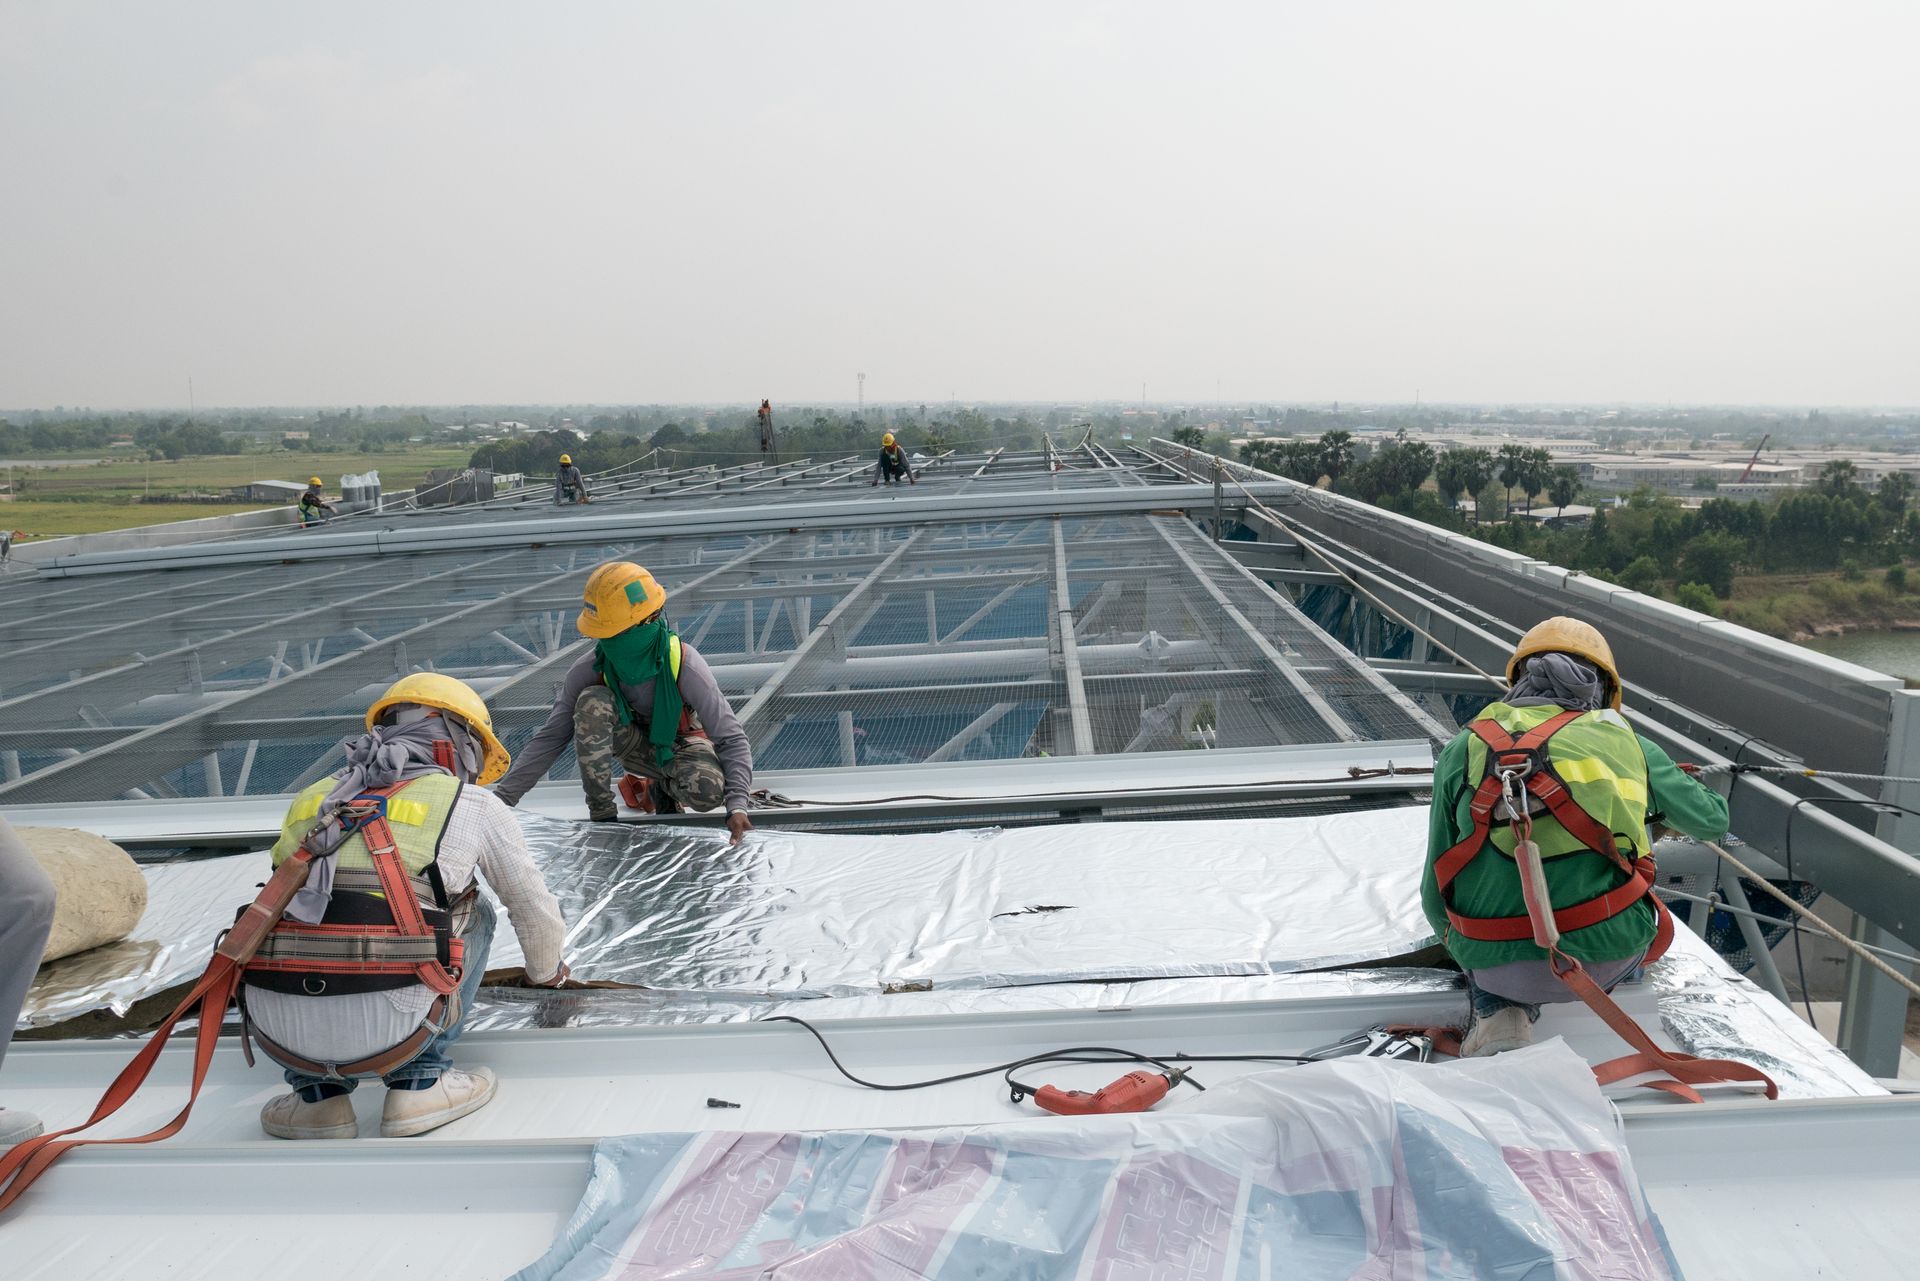 men working on a commercial roof